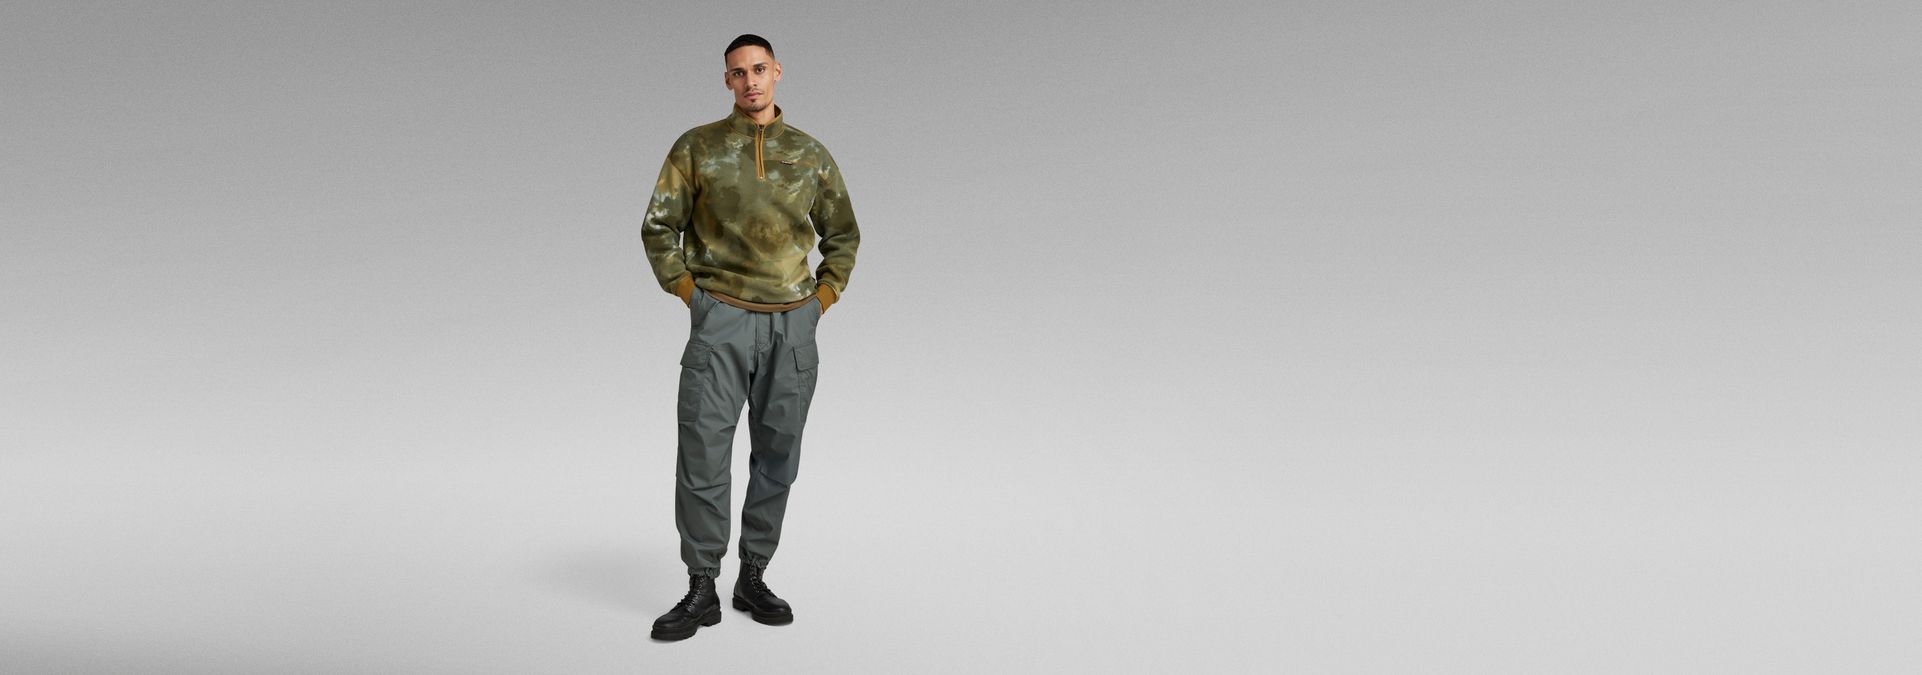 Balloon Cargo Pants Relaxed Tapered | Black | G-Star RAW® US